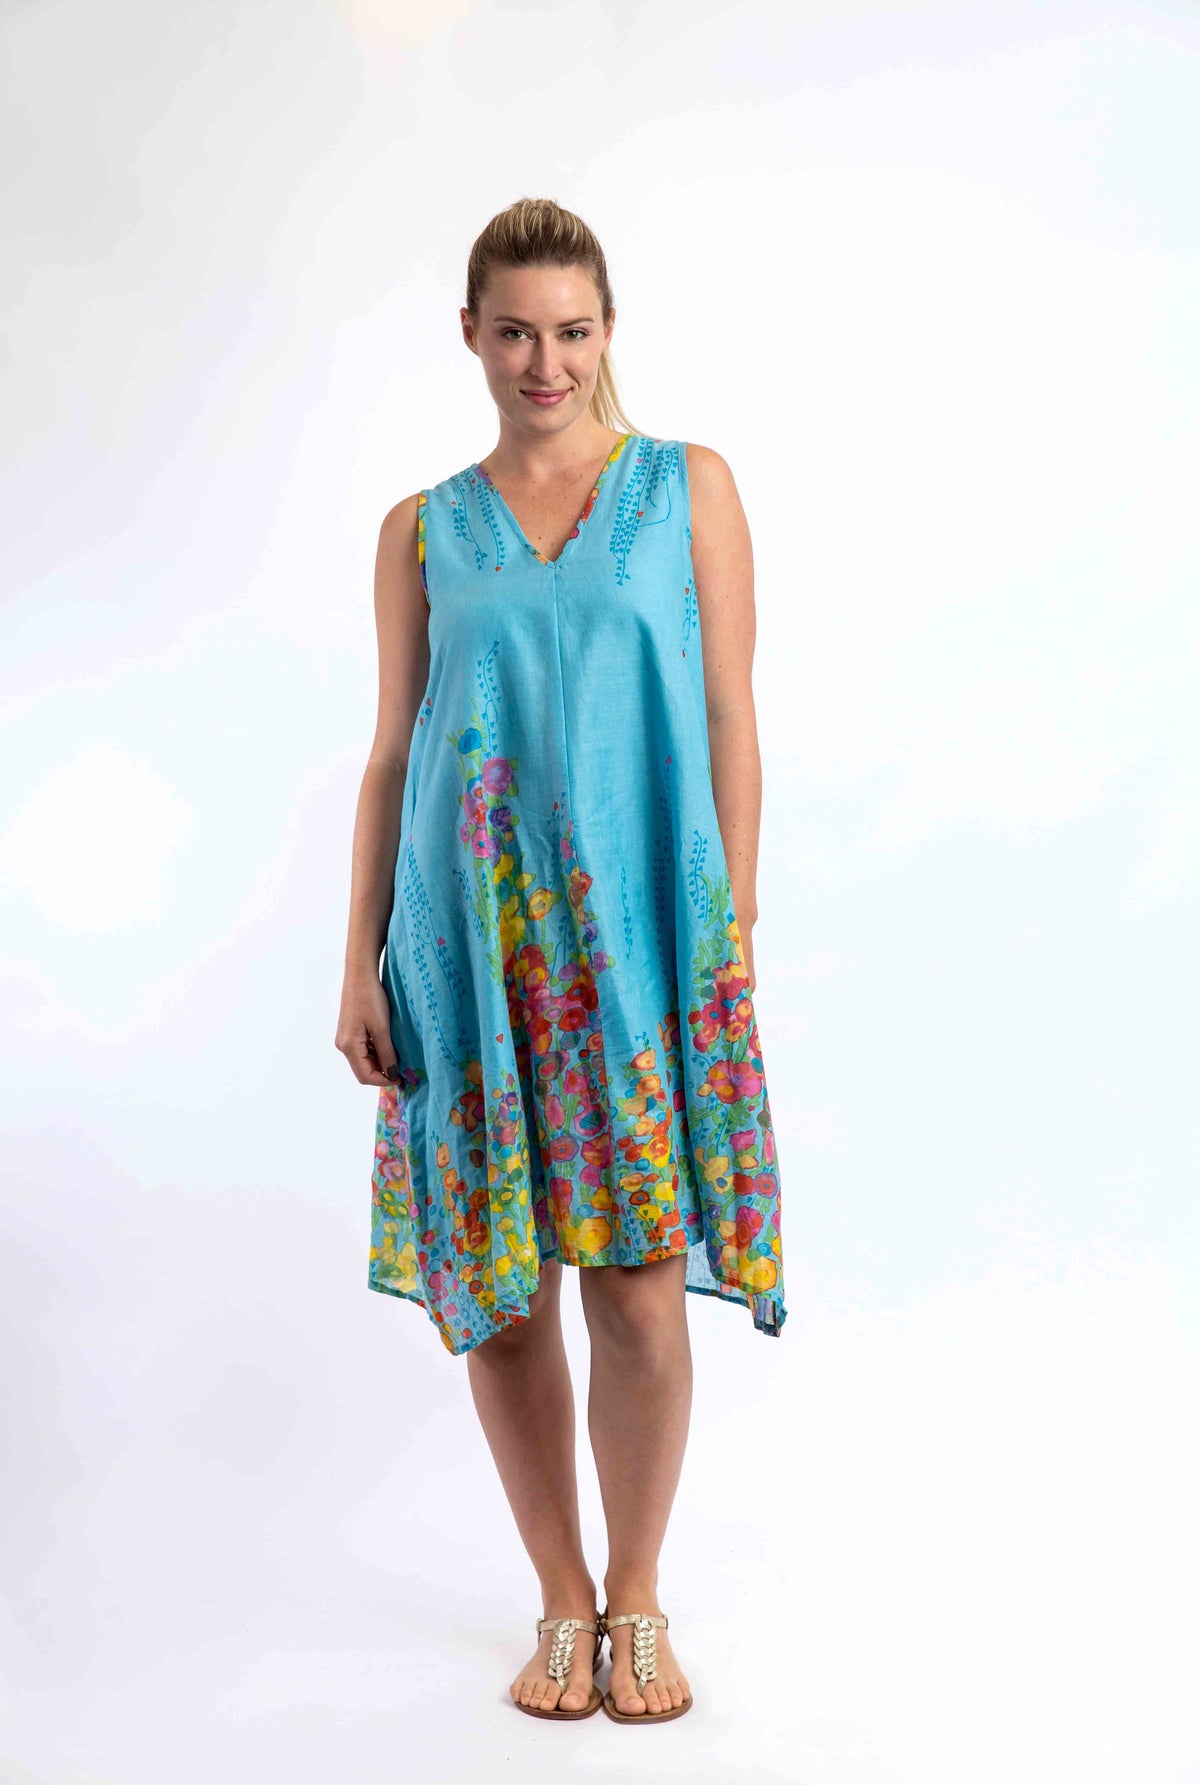 Coolum Dress in Midday Blue Spring